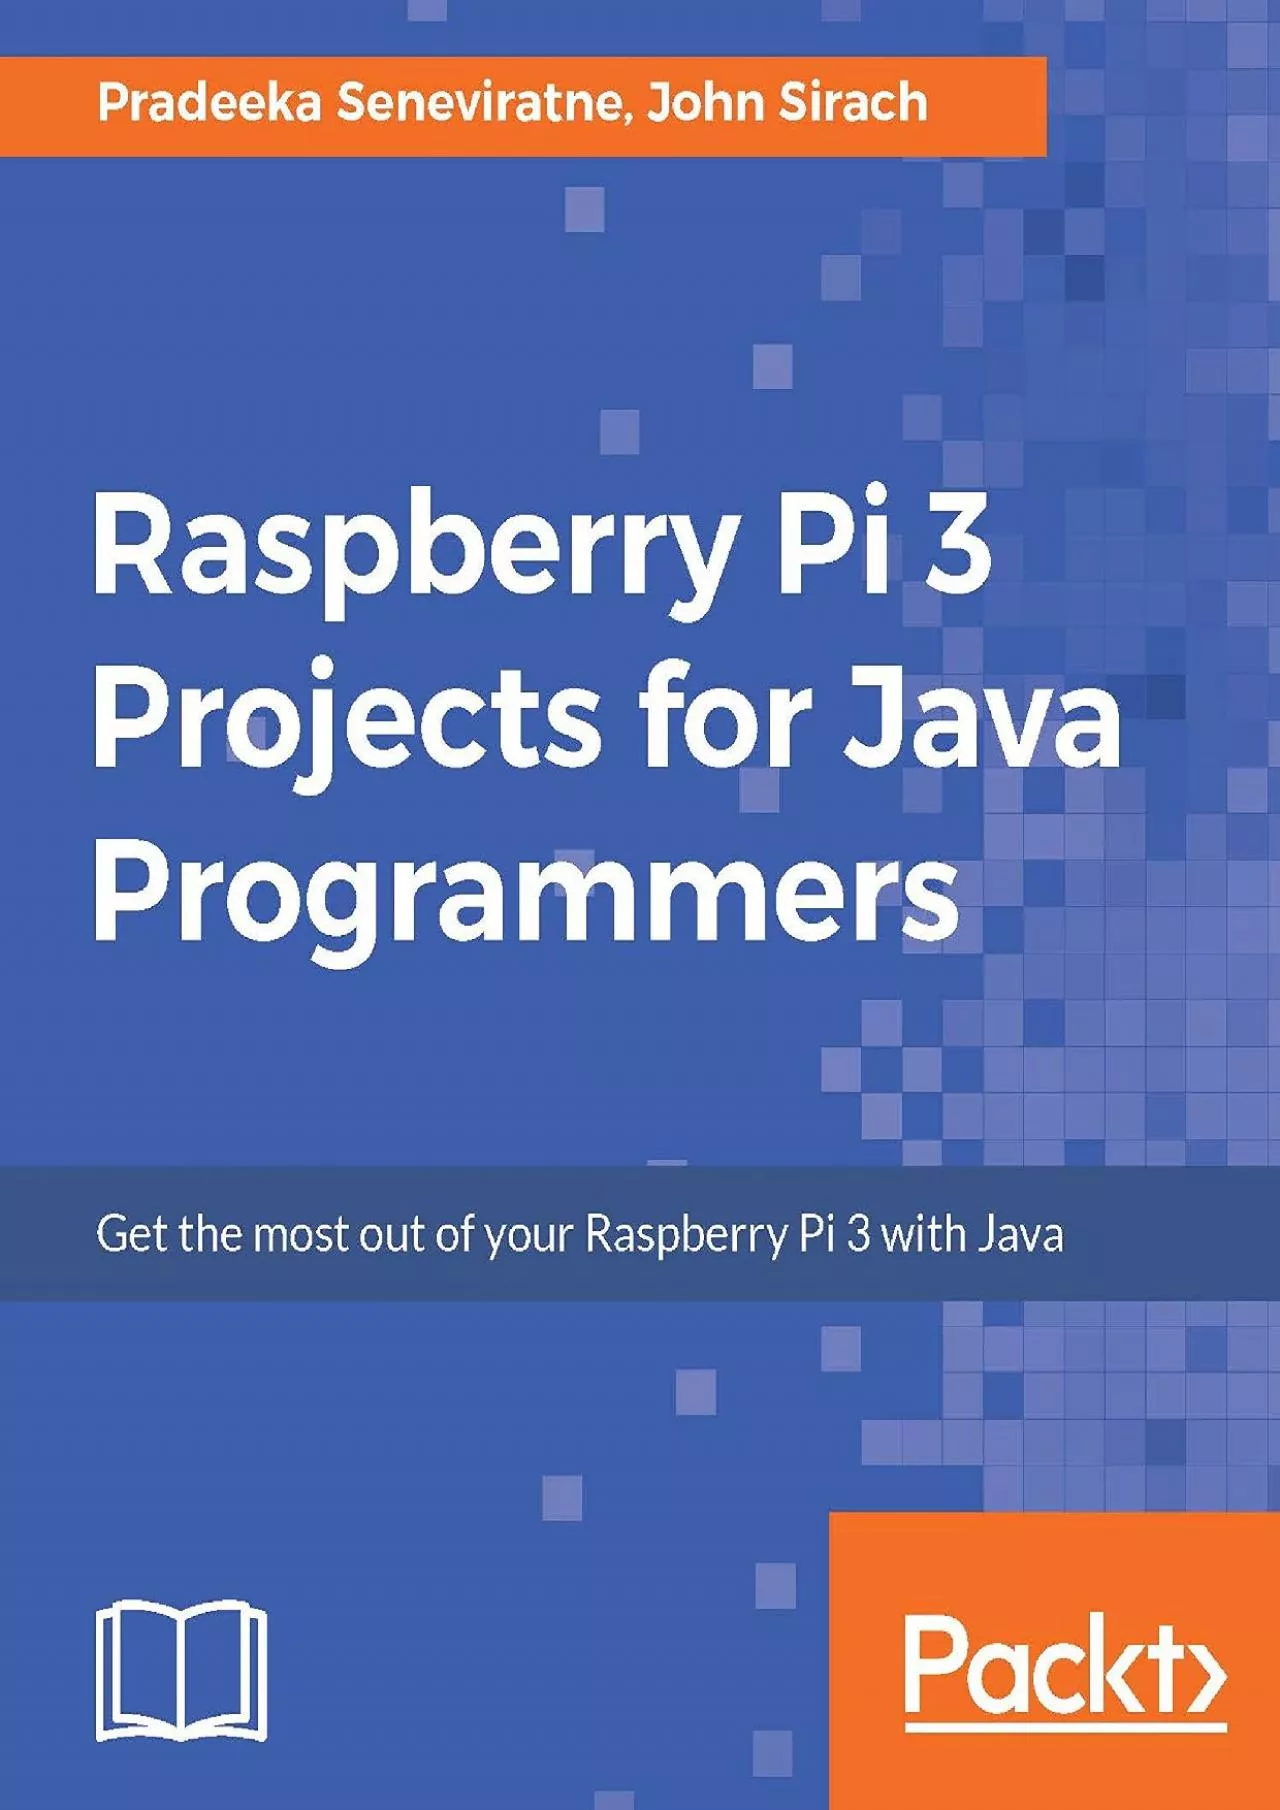 [eBOOK]-Raspberry Pi 3 Projects for Java Programmers: Get the most out of your Raspberry